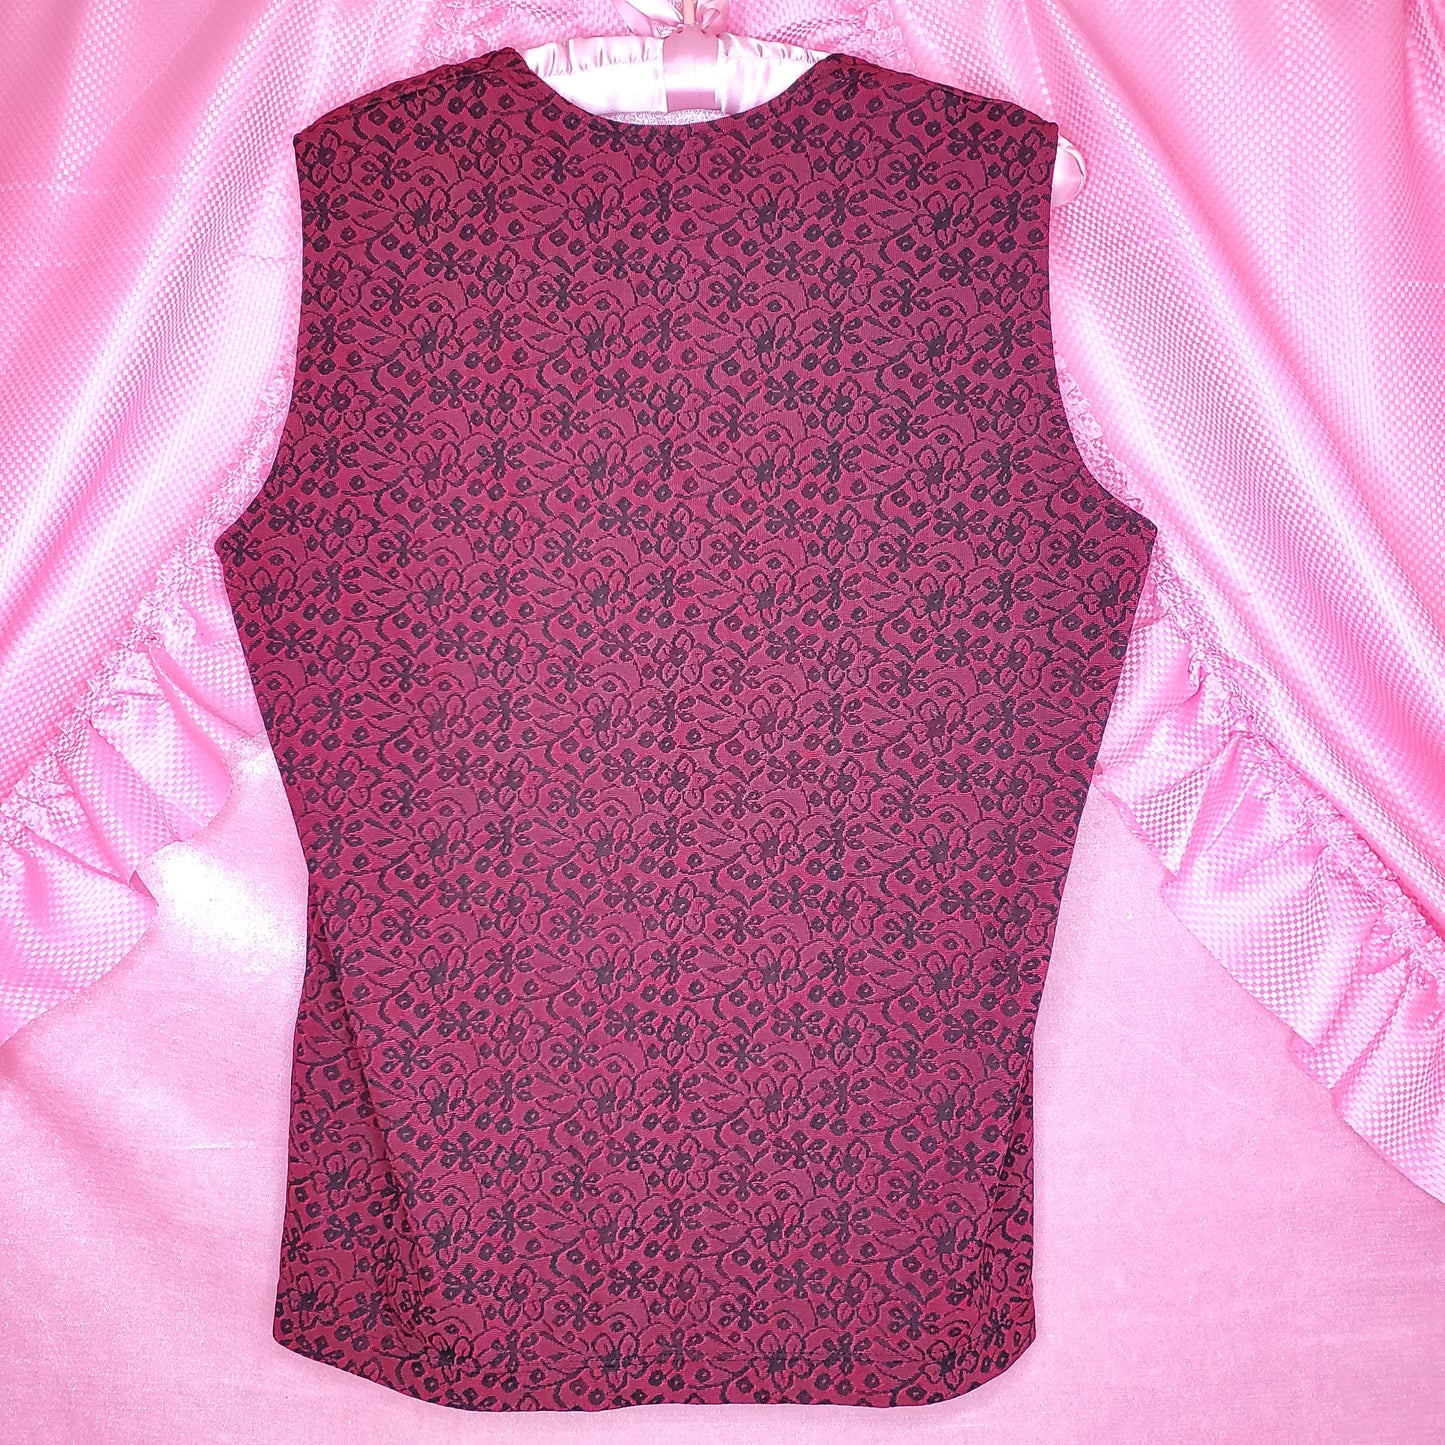 Goth spring 90s top